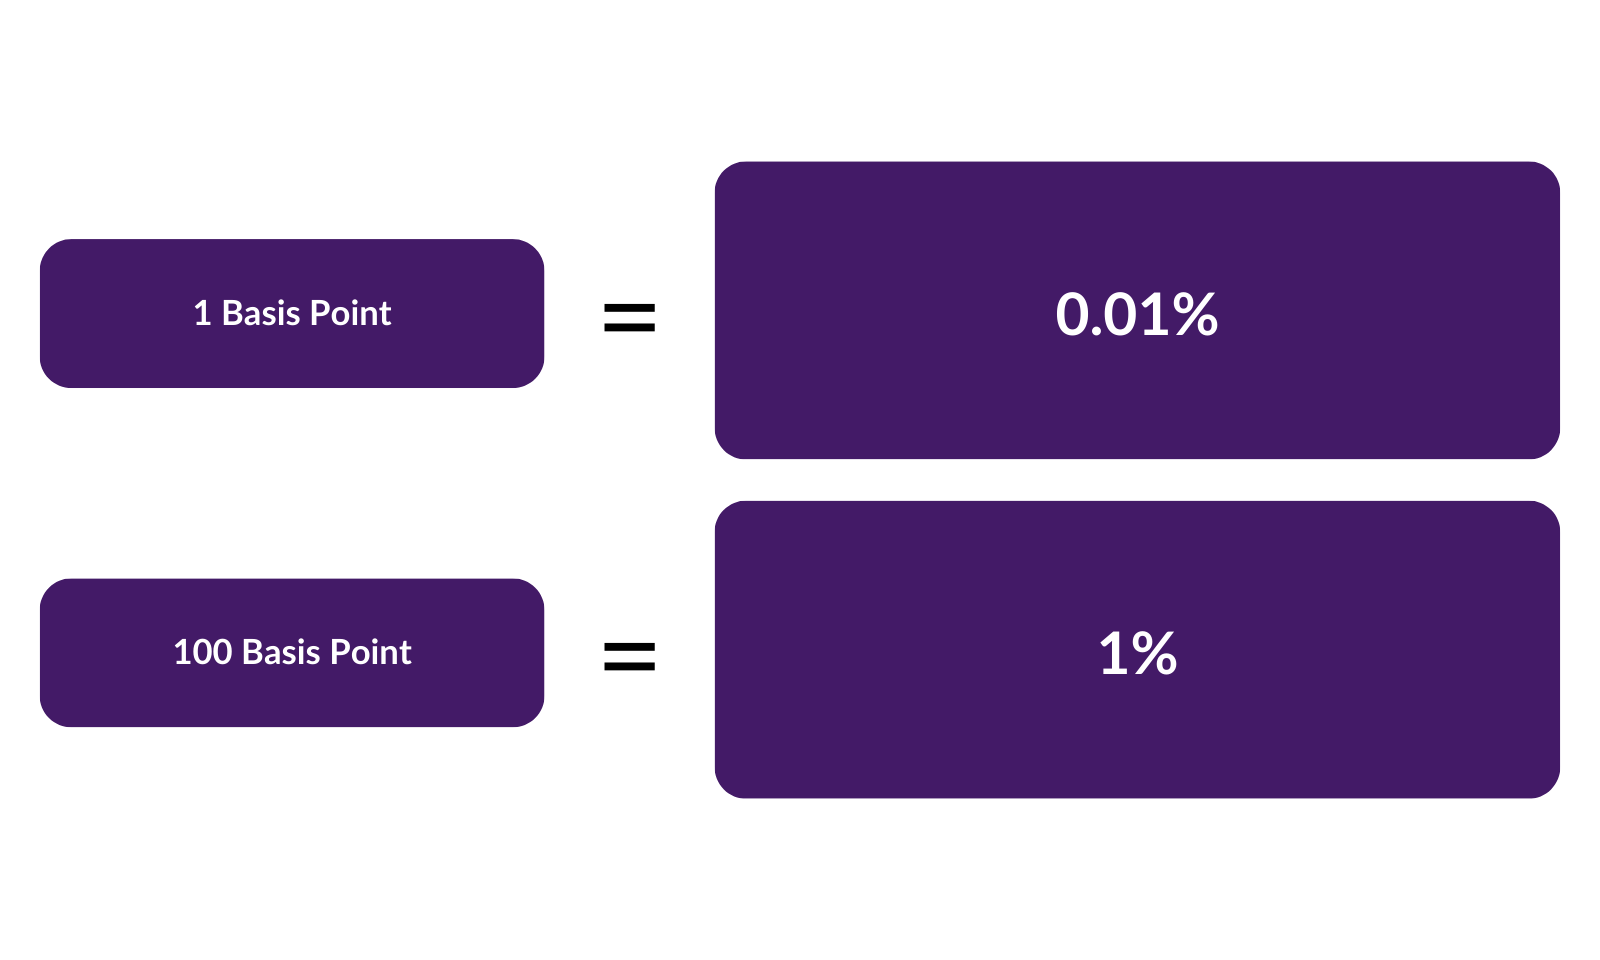 Basis Point to Percentage Conversions